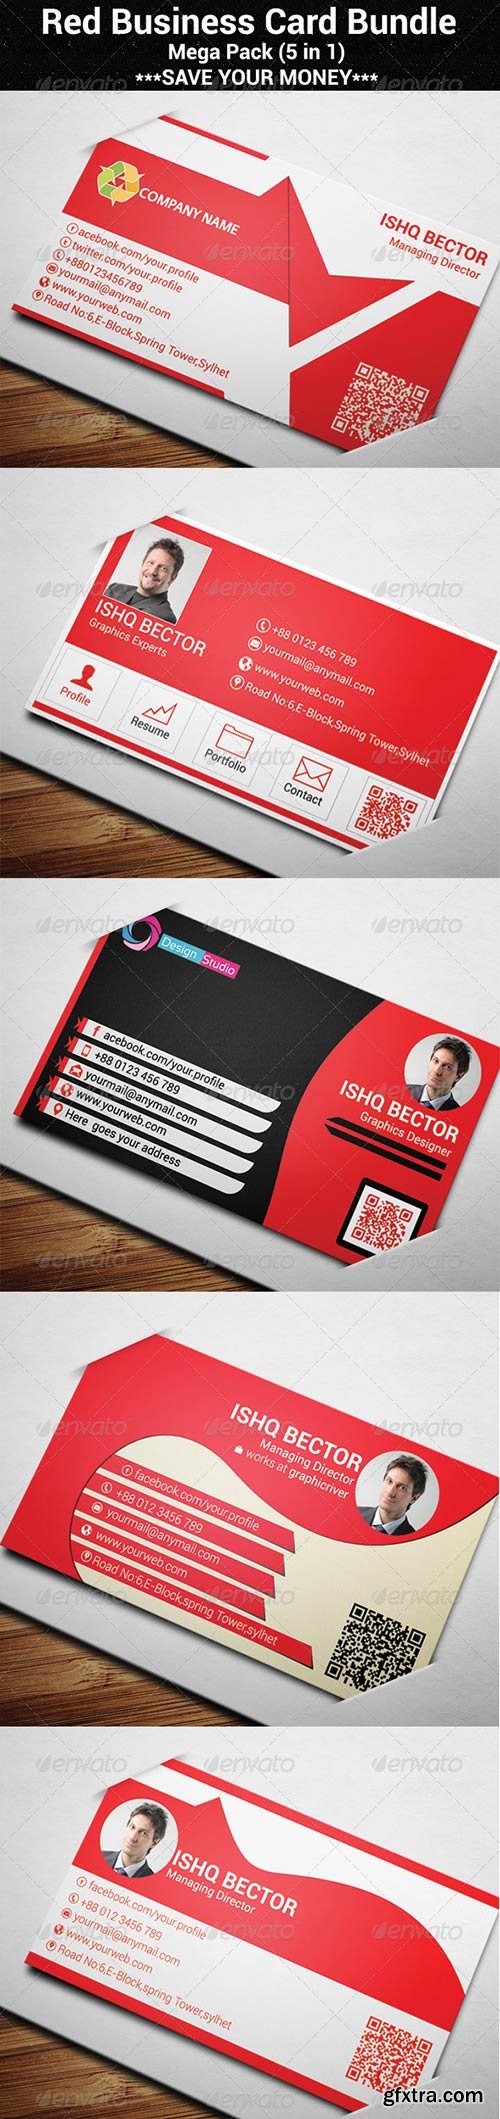 Graphicriver - 5 in 1 Red Business Card Bundle